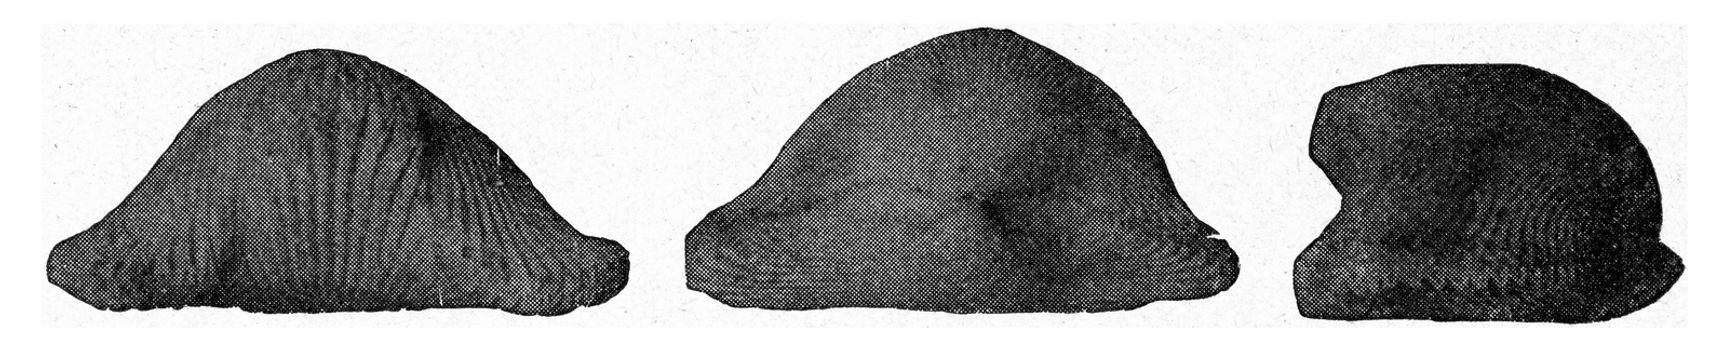 Brachiopod of the Upper Cretaceous, vintage engraved illustration. From the Universe and Humanity, 1910.
